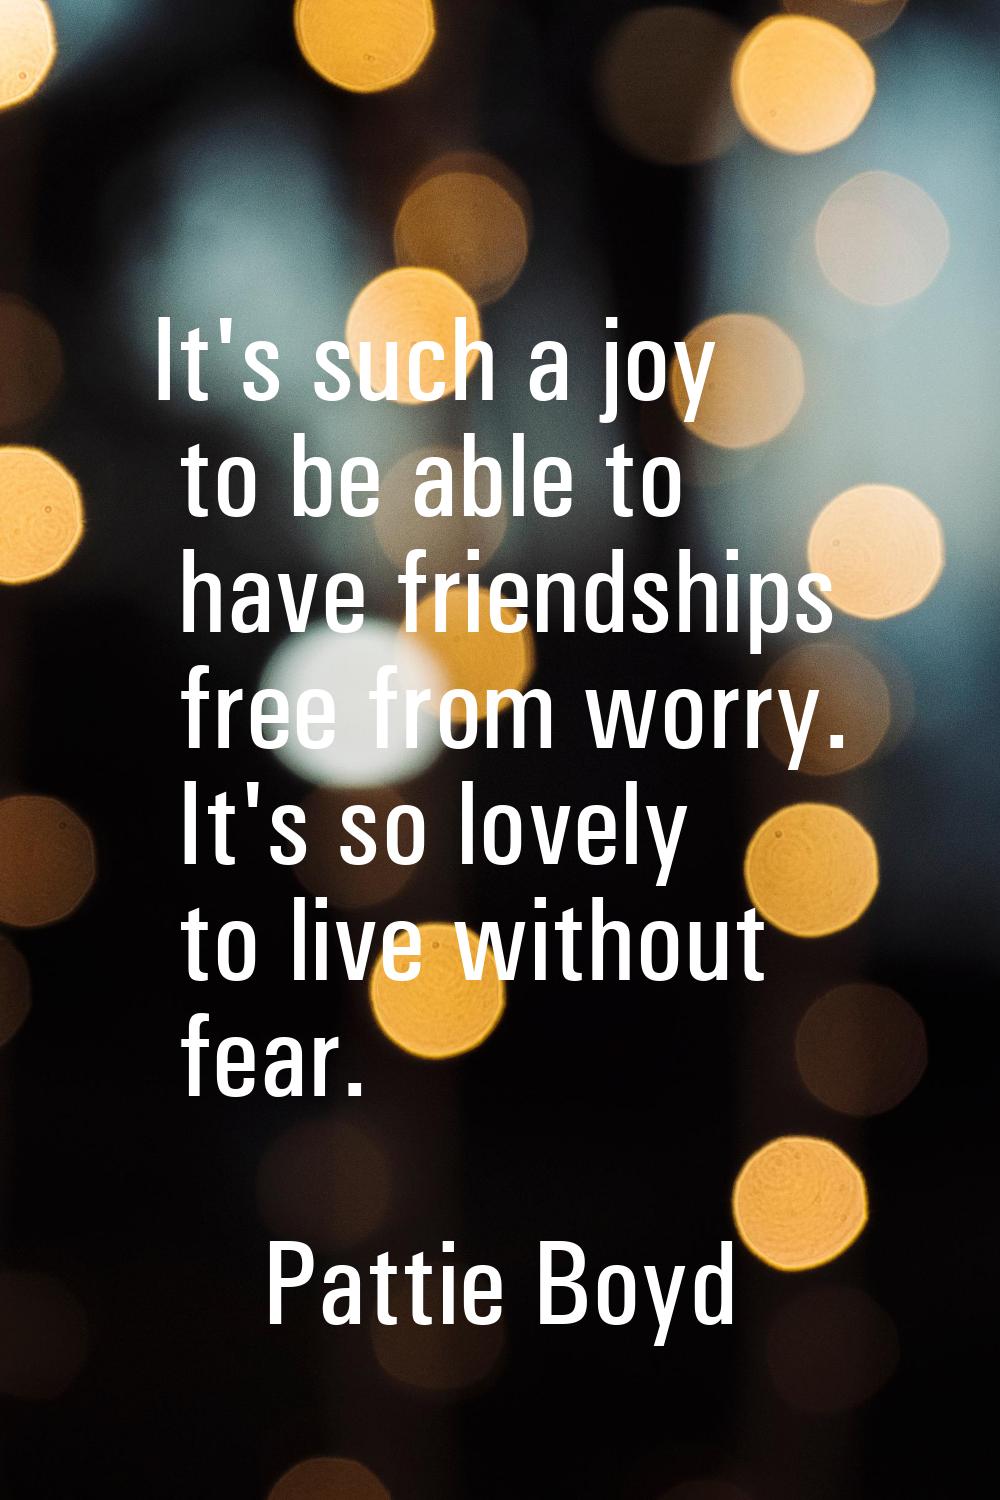 It's such a joy to be able to have friendships free from worry. It's so lovely to live without fear